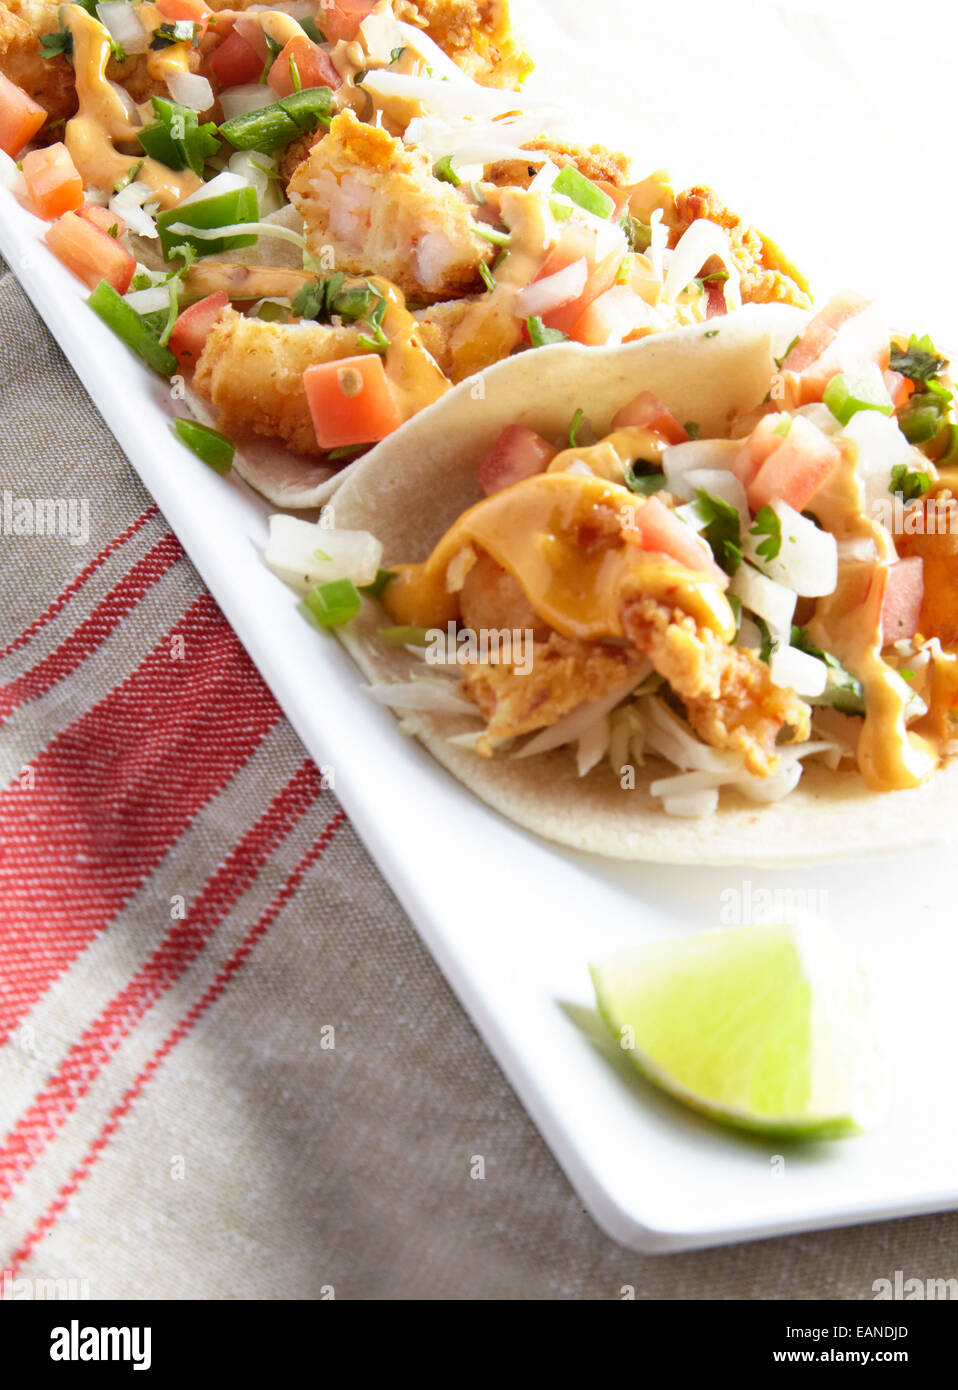 Shrimp Tacos on a red and white plate Stock Photo